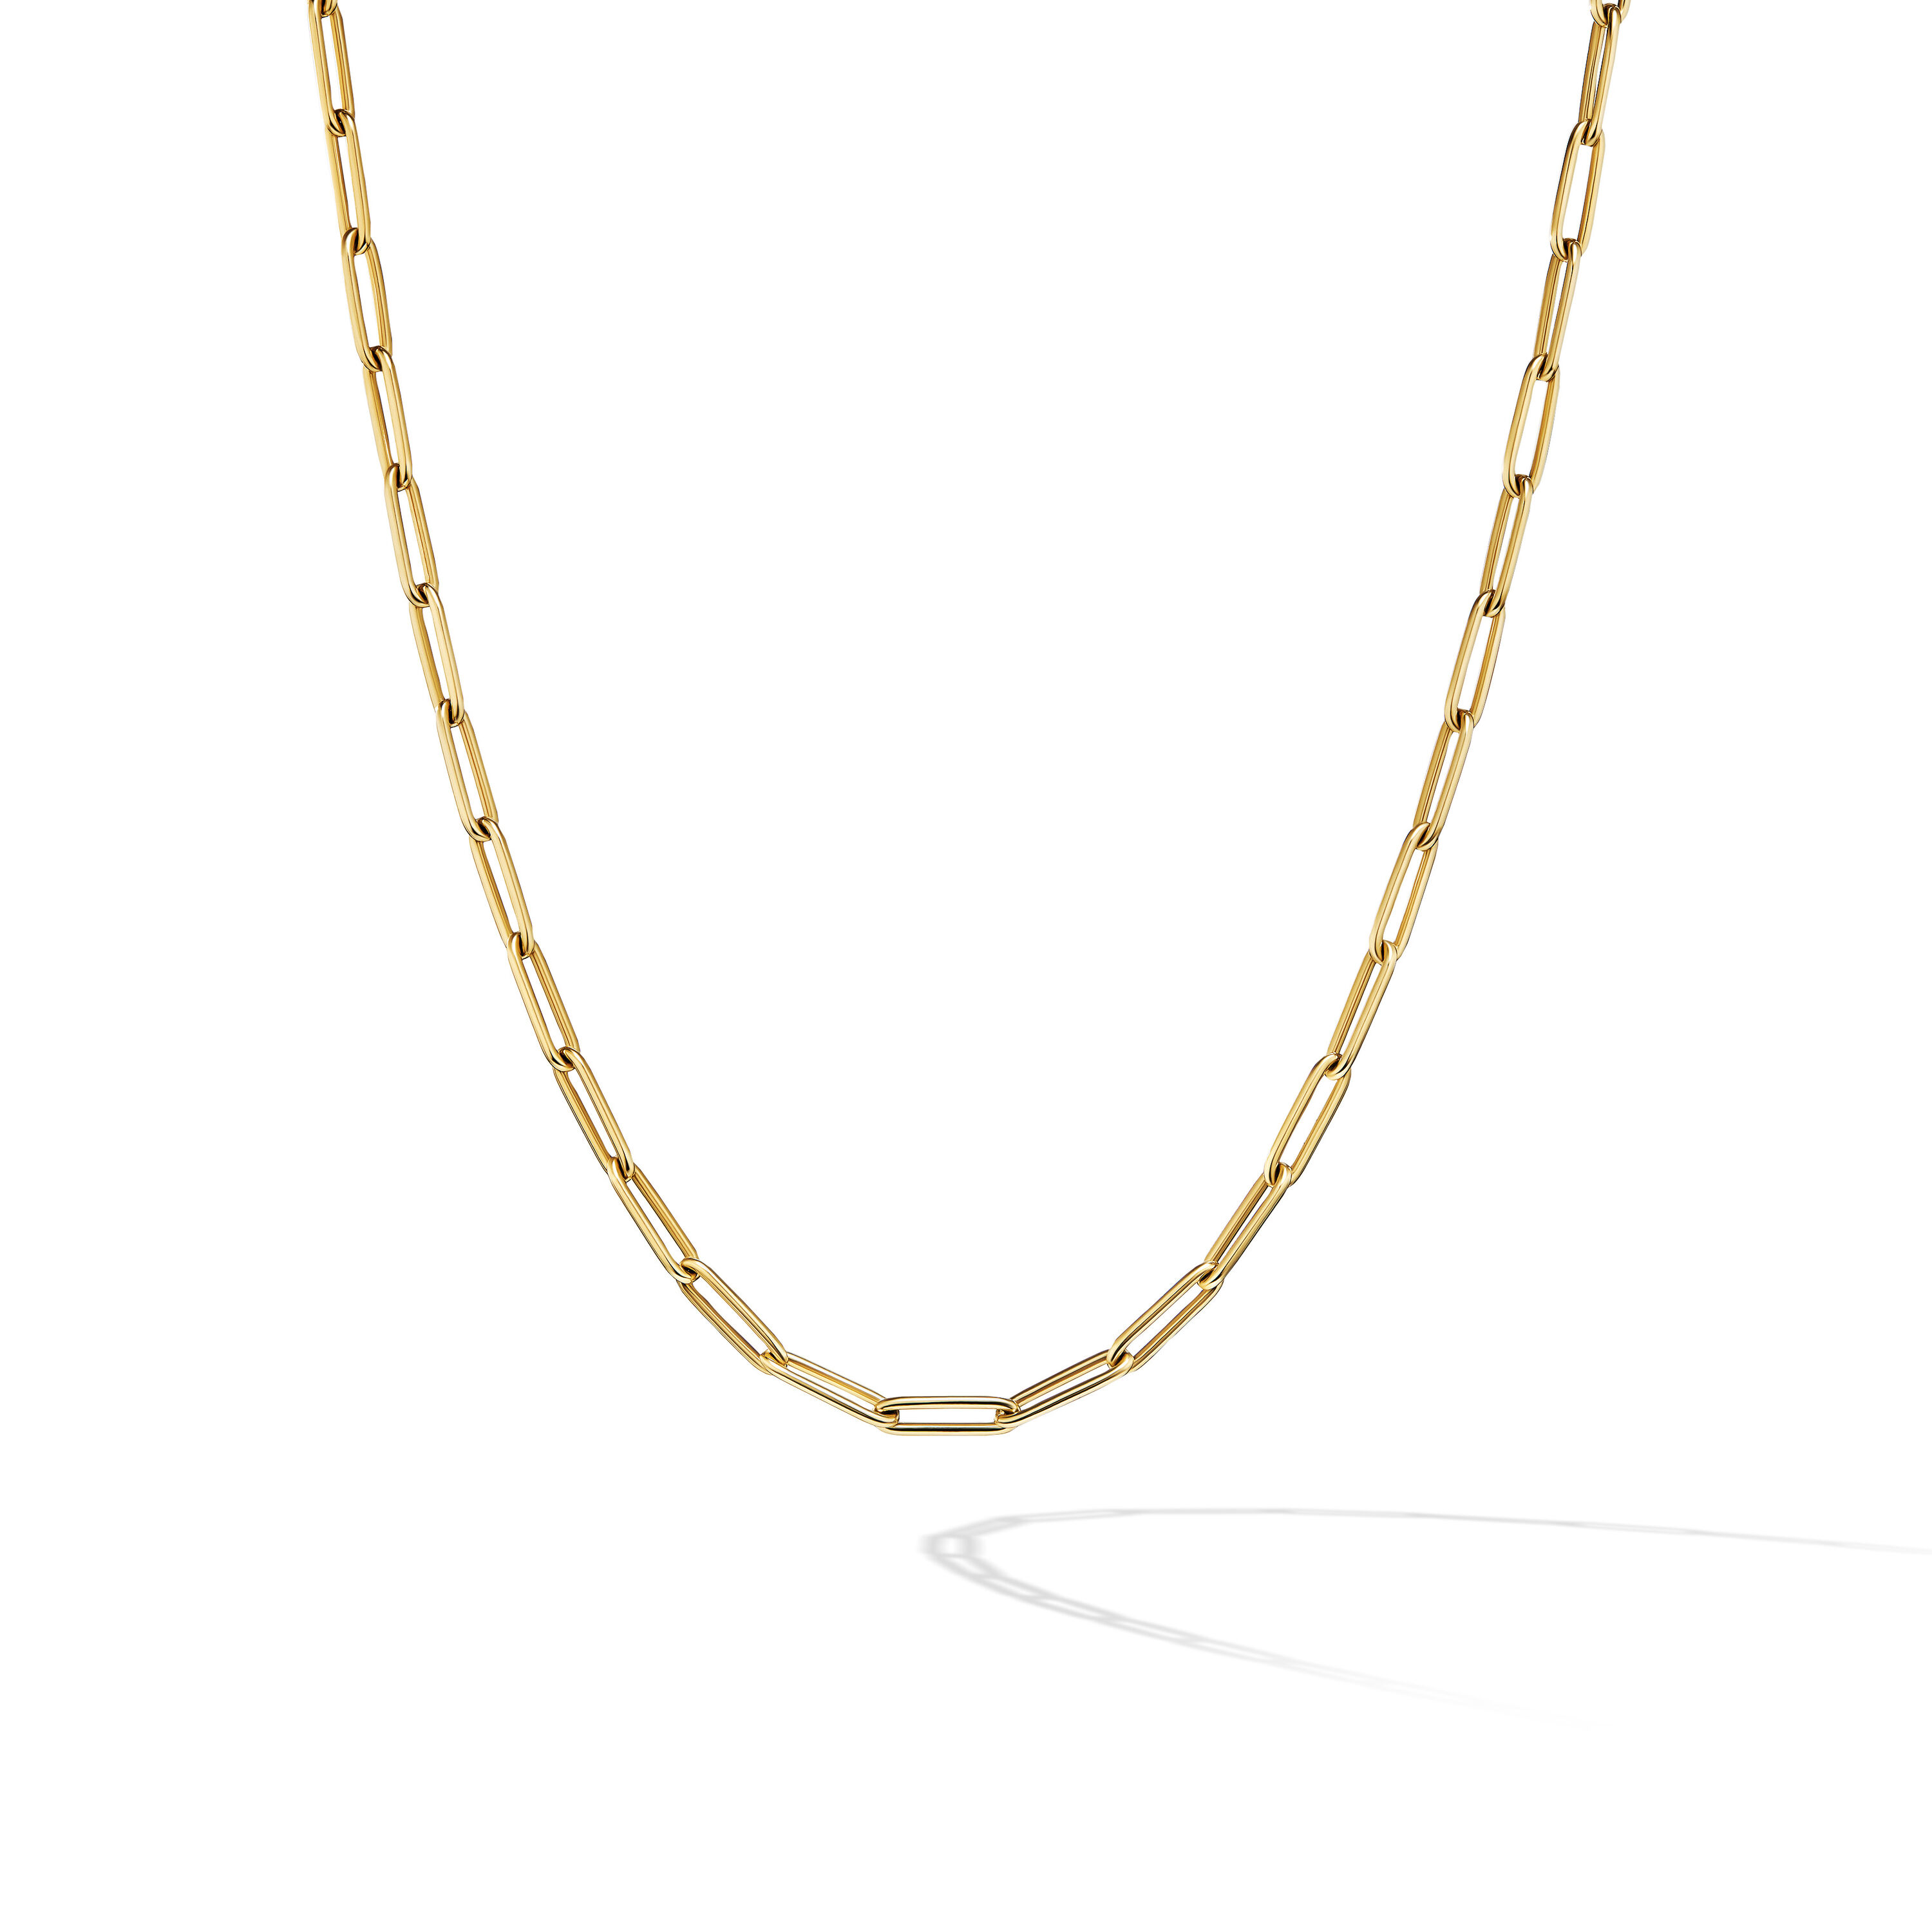 Chain Link Necklace in 18K Yellow Gold, 3.5mm